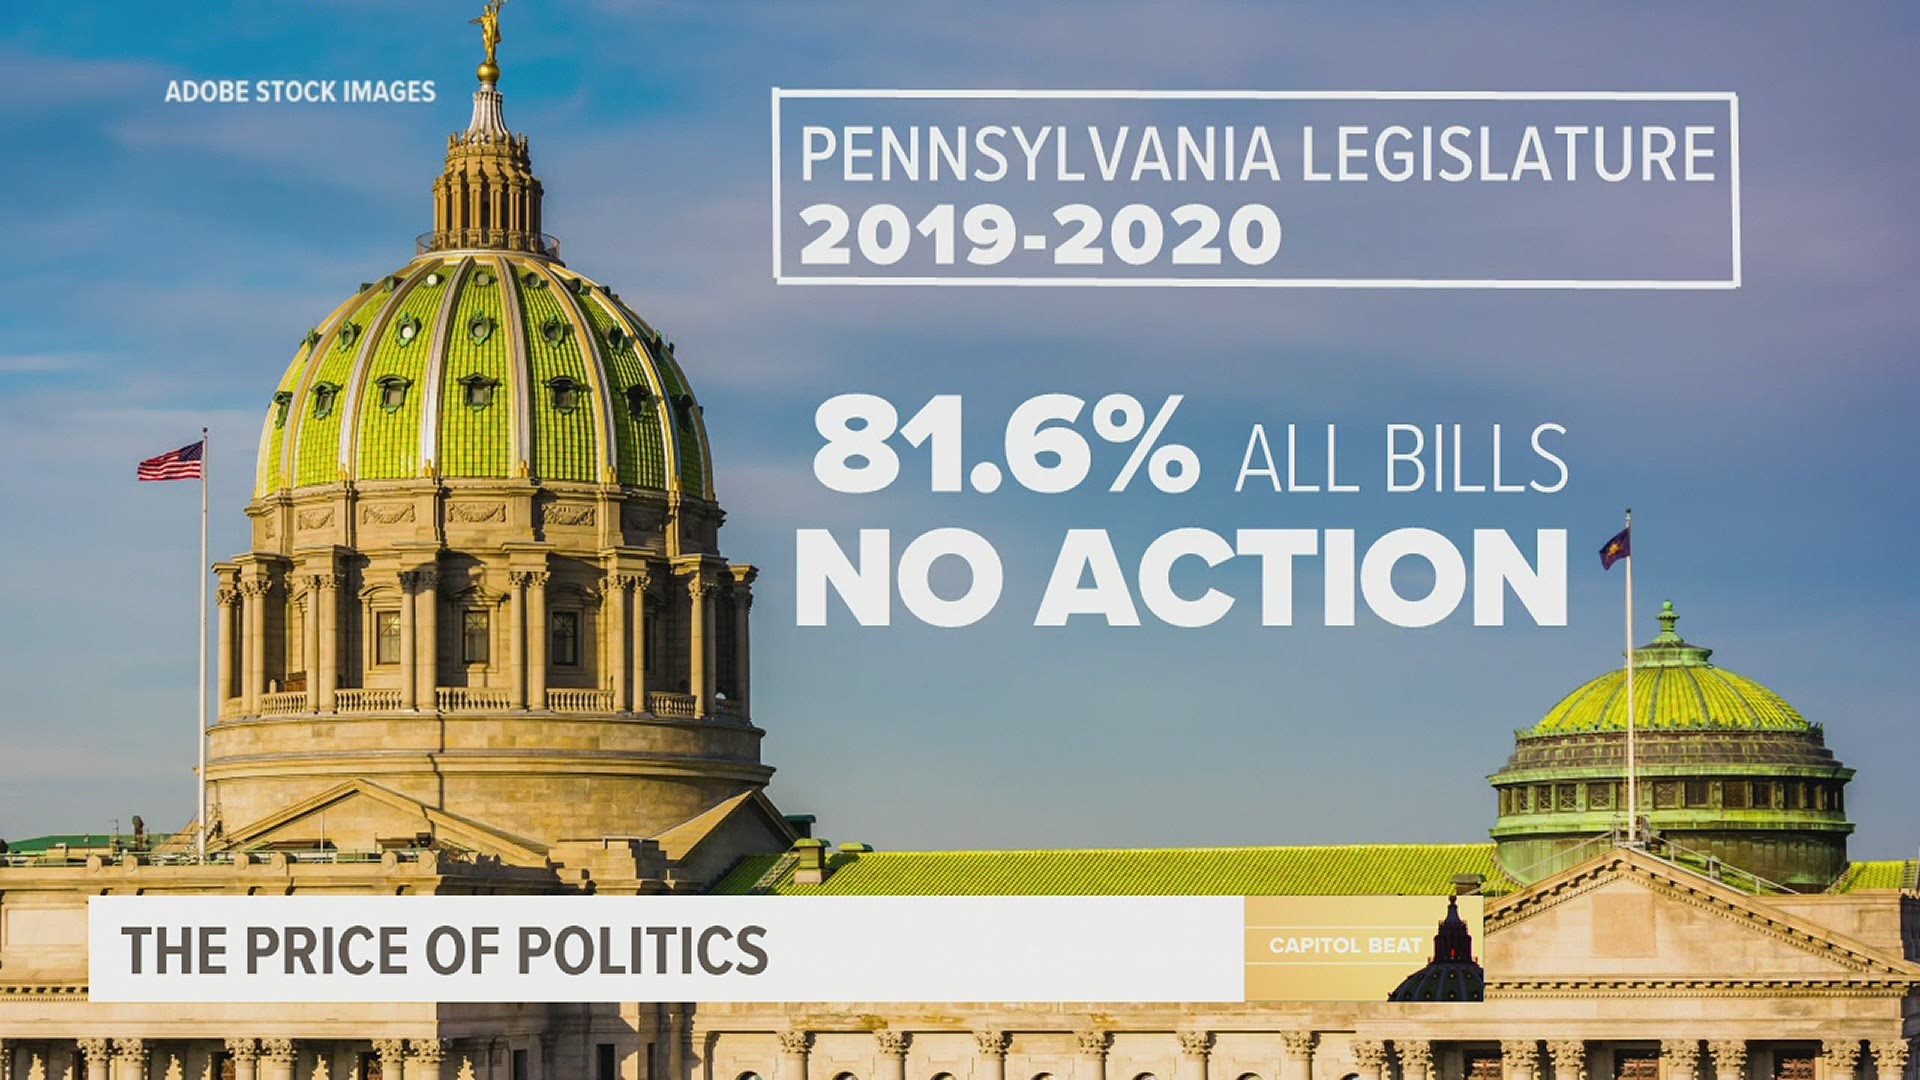 A FOX43 investigation revealed only 770 of the 4,198 pieces of legislation brought forward by state lawmakers moved forward during the 2019-2020 session.